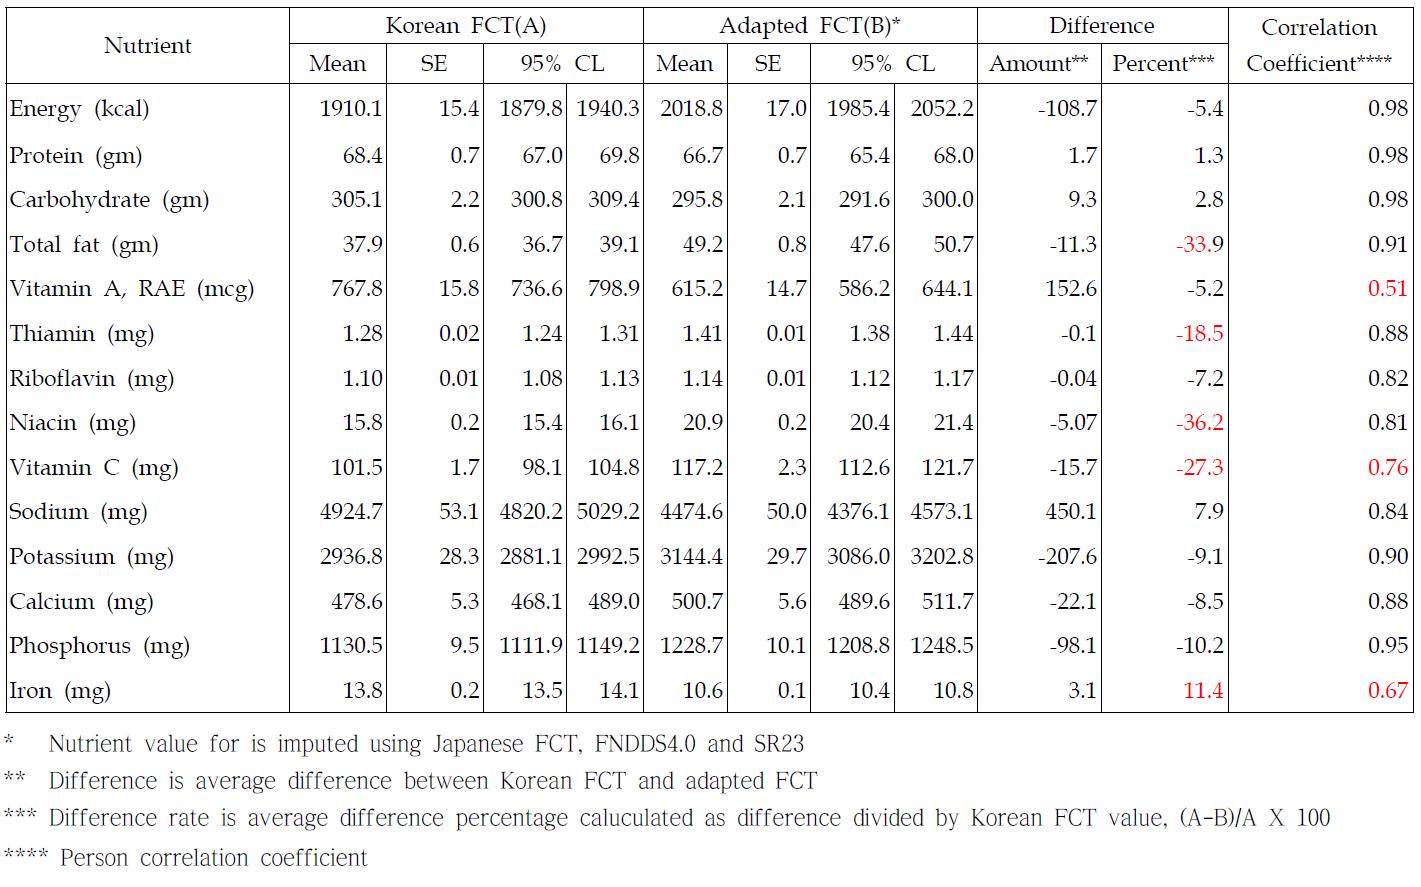 Mean nutrient intake based on Korean FCT and adapted FCT